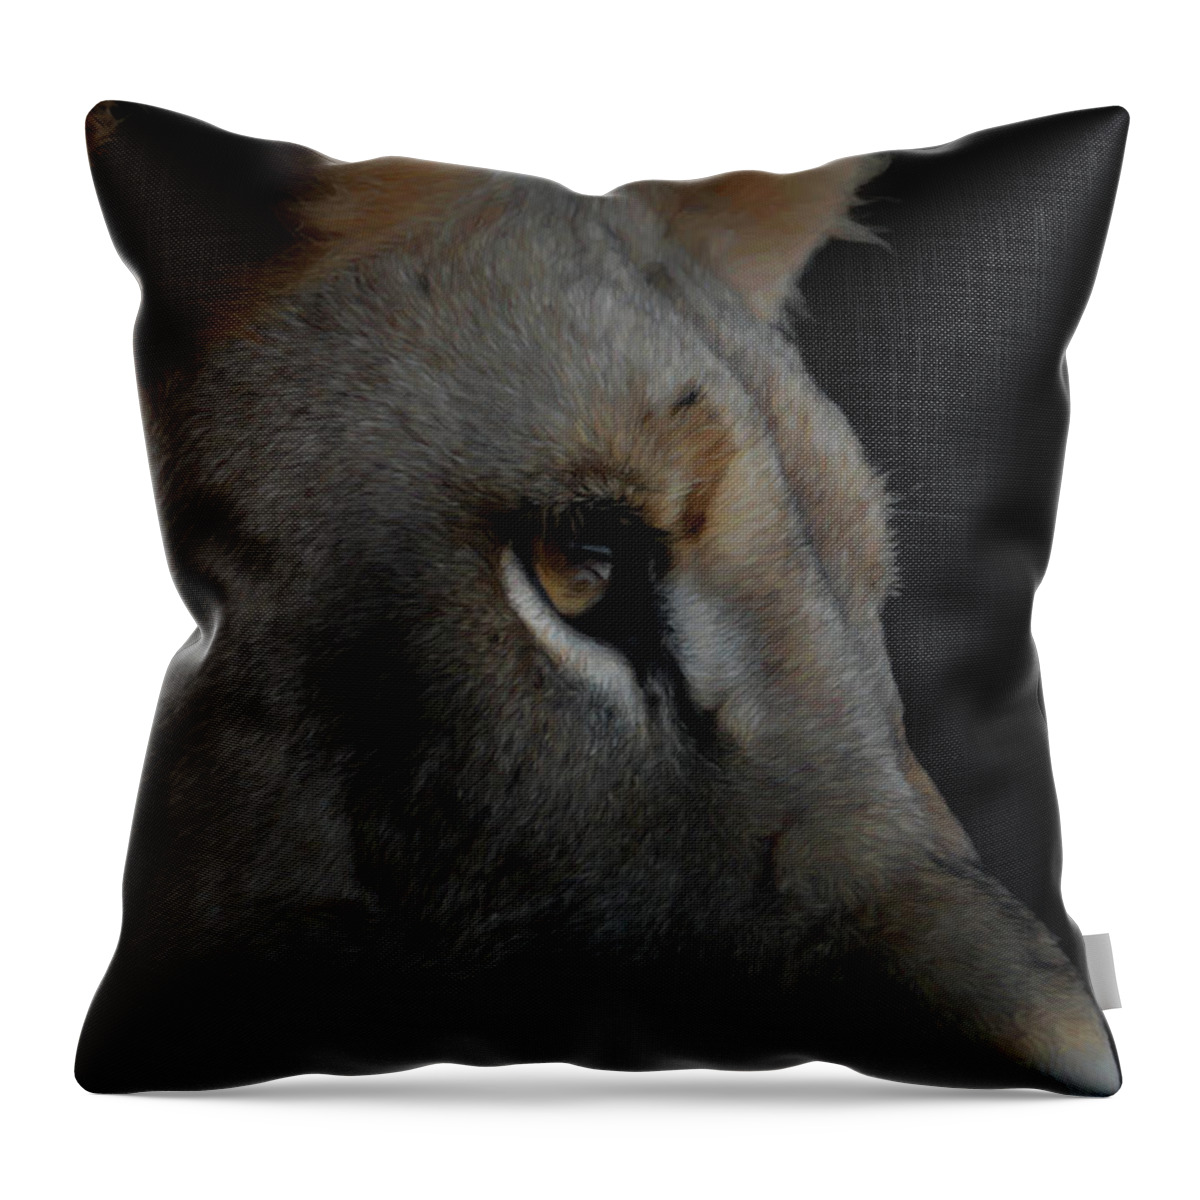 Africa Throw Pillow featuring the digital art Deep Thought by Ernest Echols